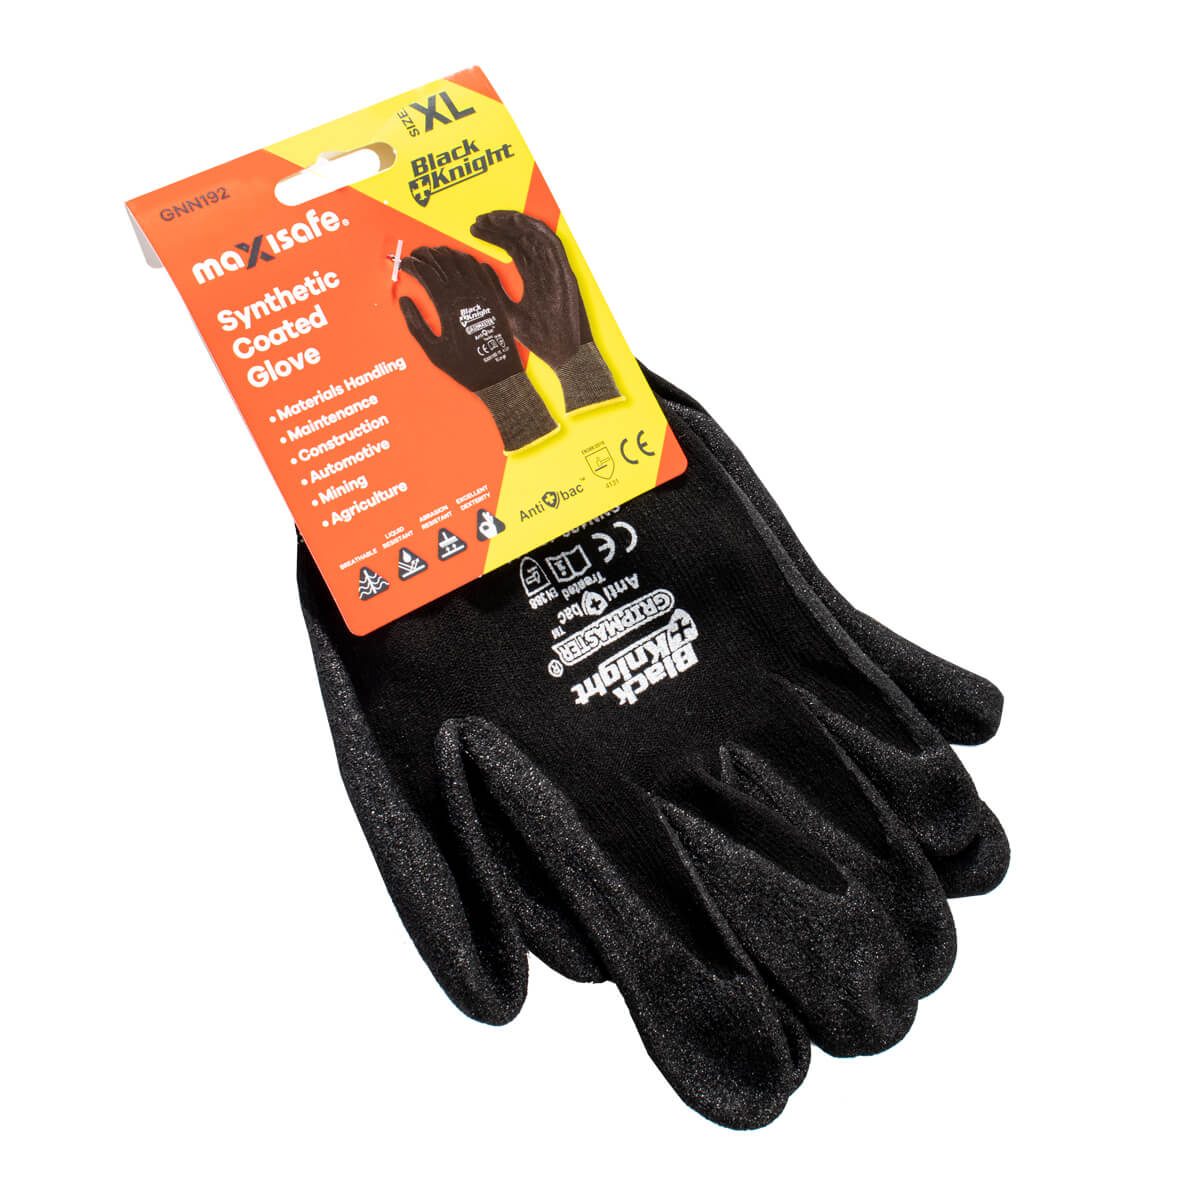 Gloves Synthetic Coated Gripmaster XL MaxiSafe